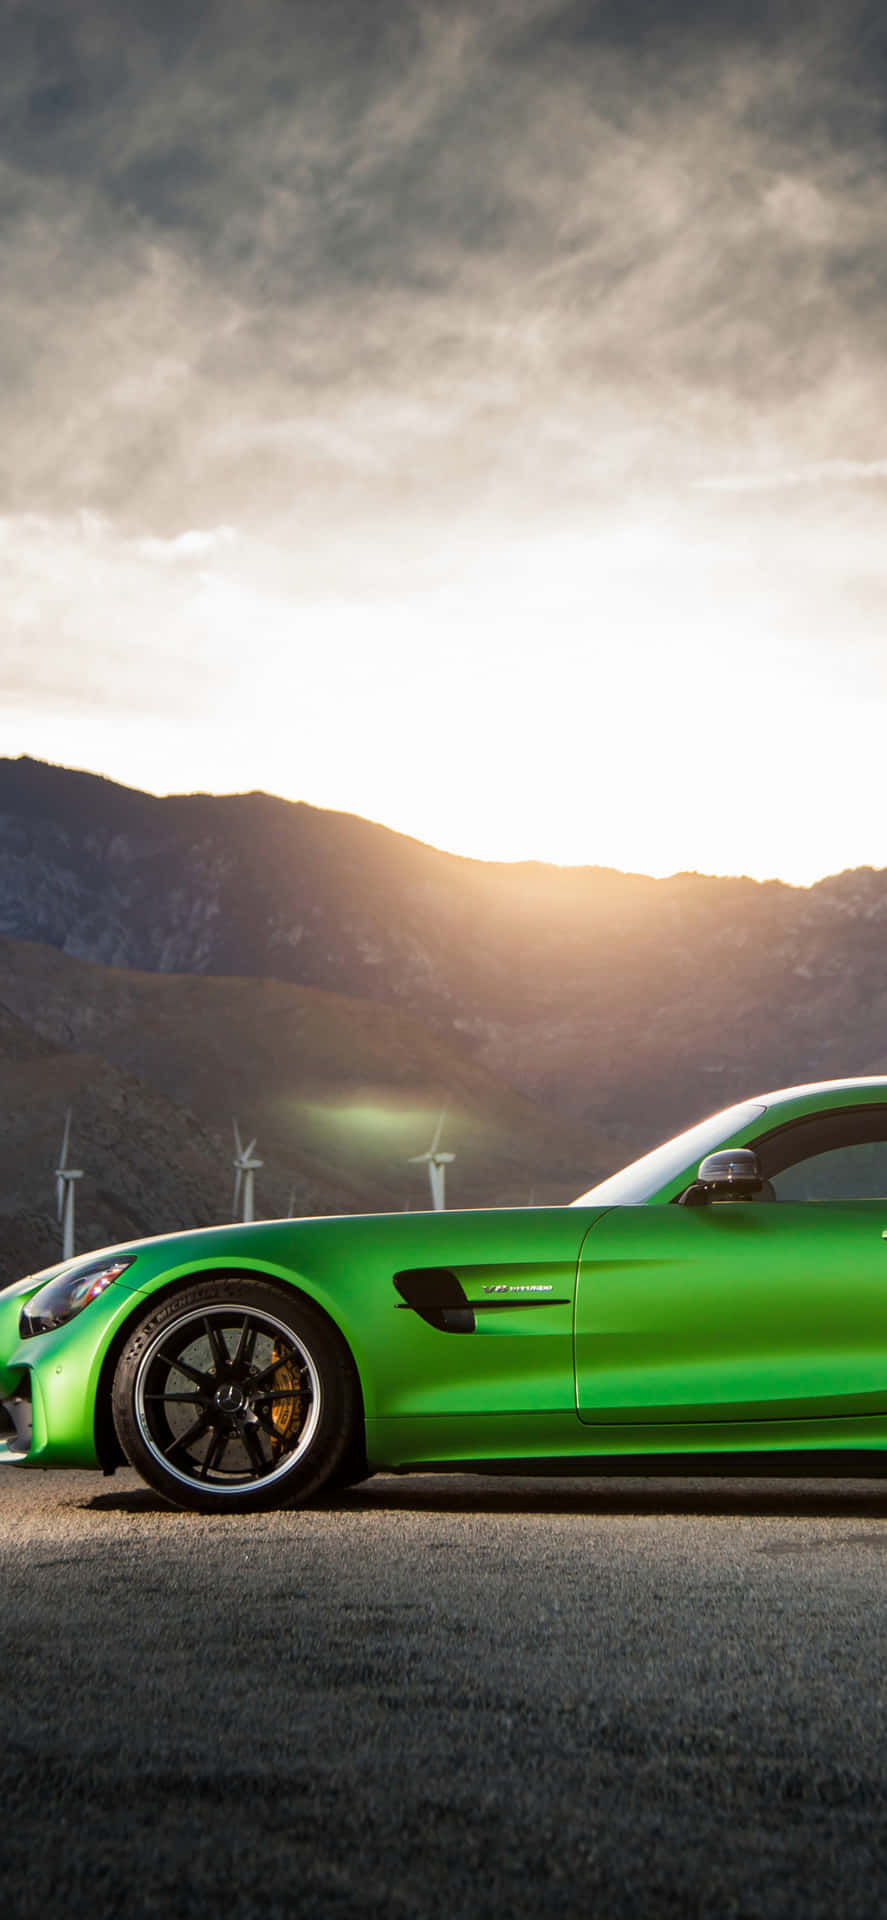 Iphone X Amg Gt-r Background Side Nose Of AMG GT